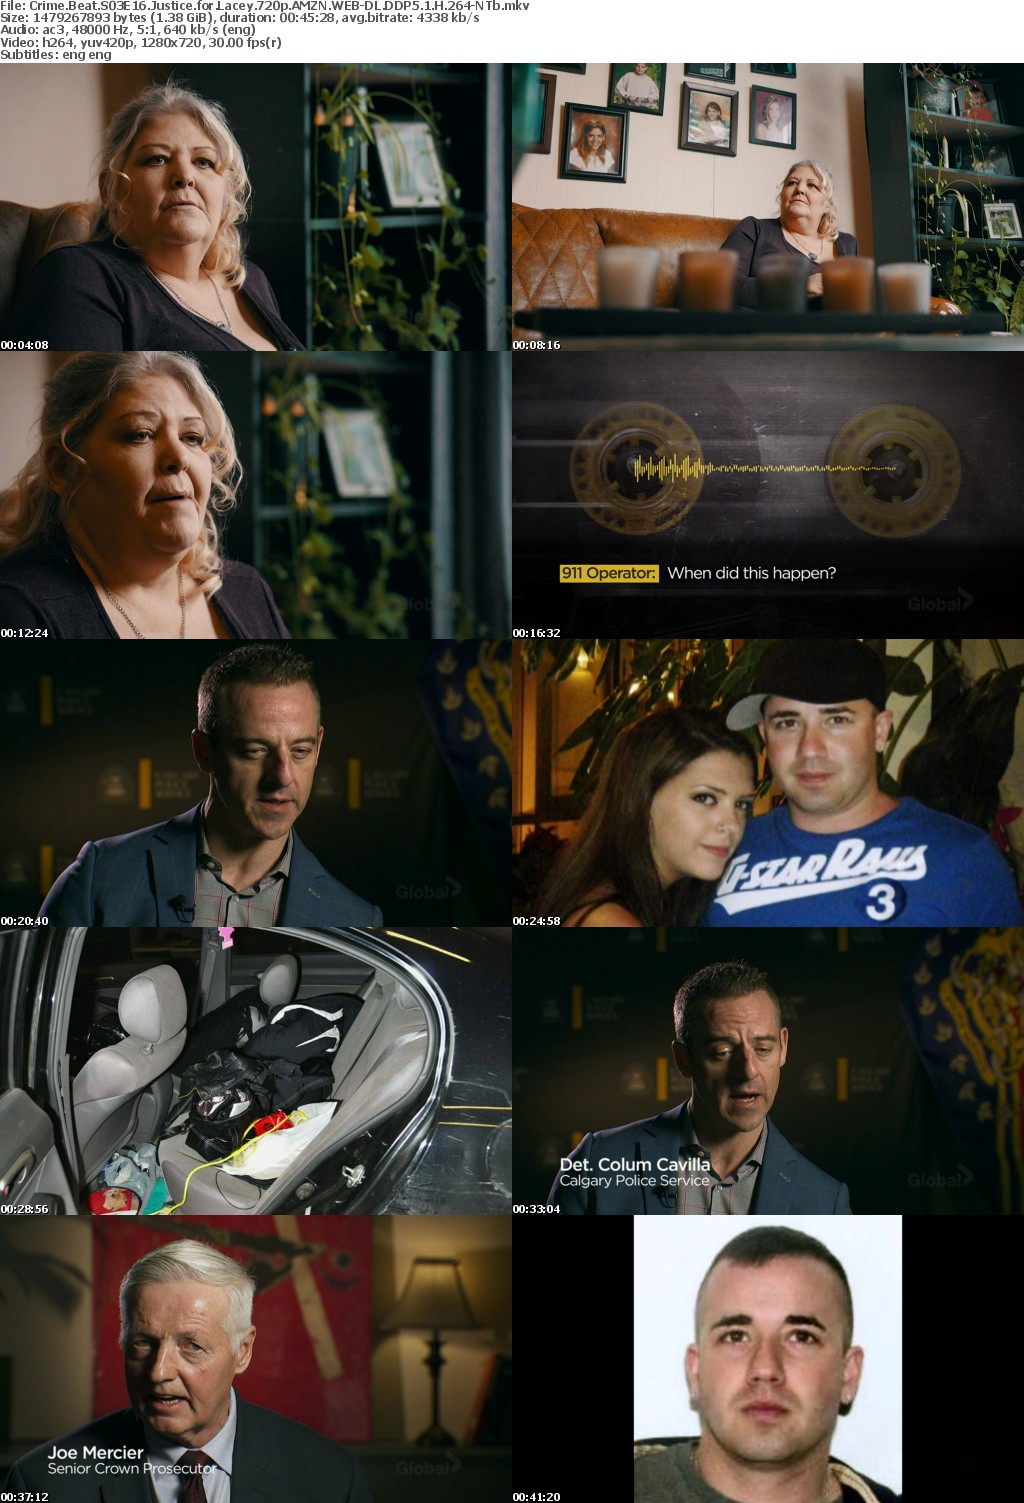 Crime Beat S03E16 Justice for Lacey 720p AMZN WEBRip DDP5 1 x264-NTb